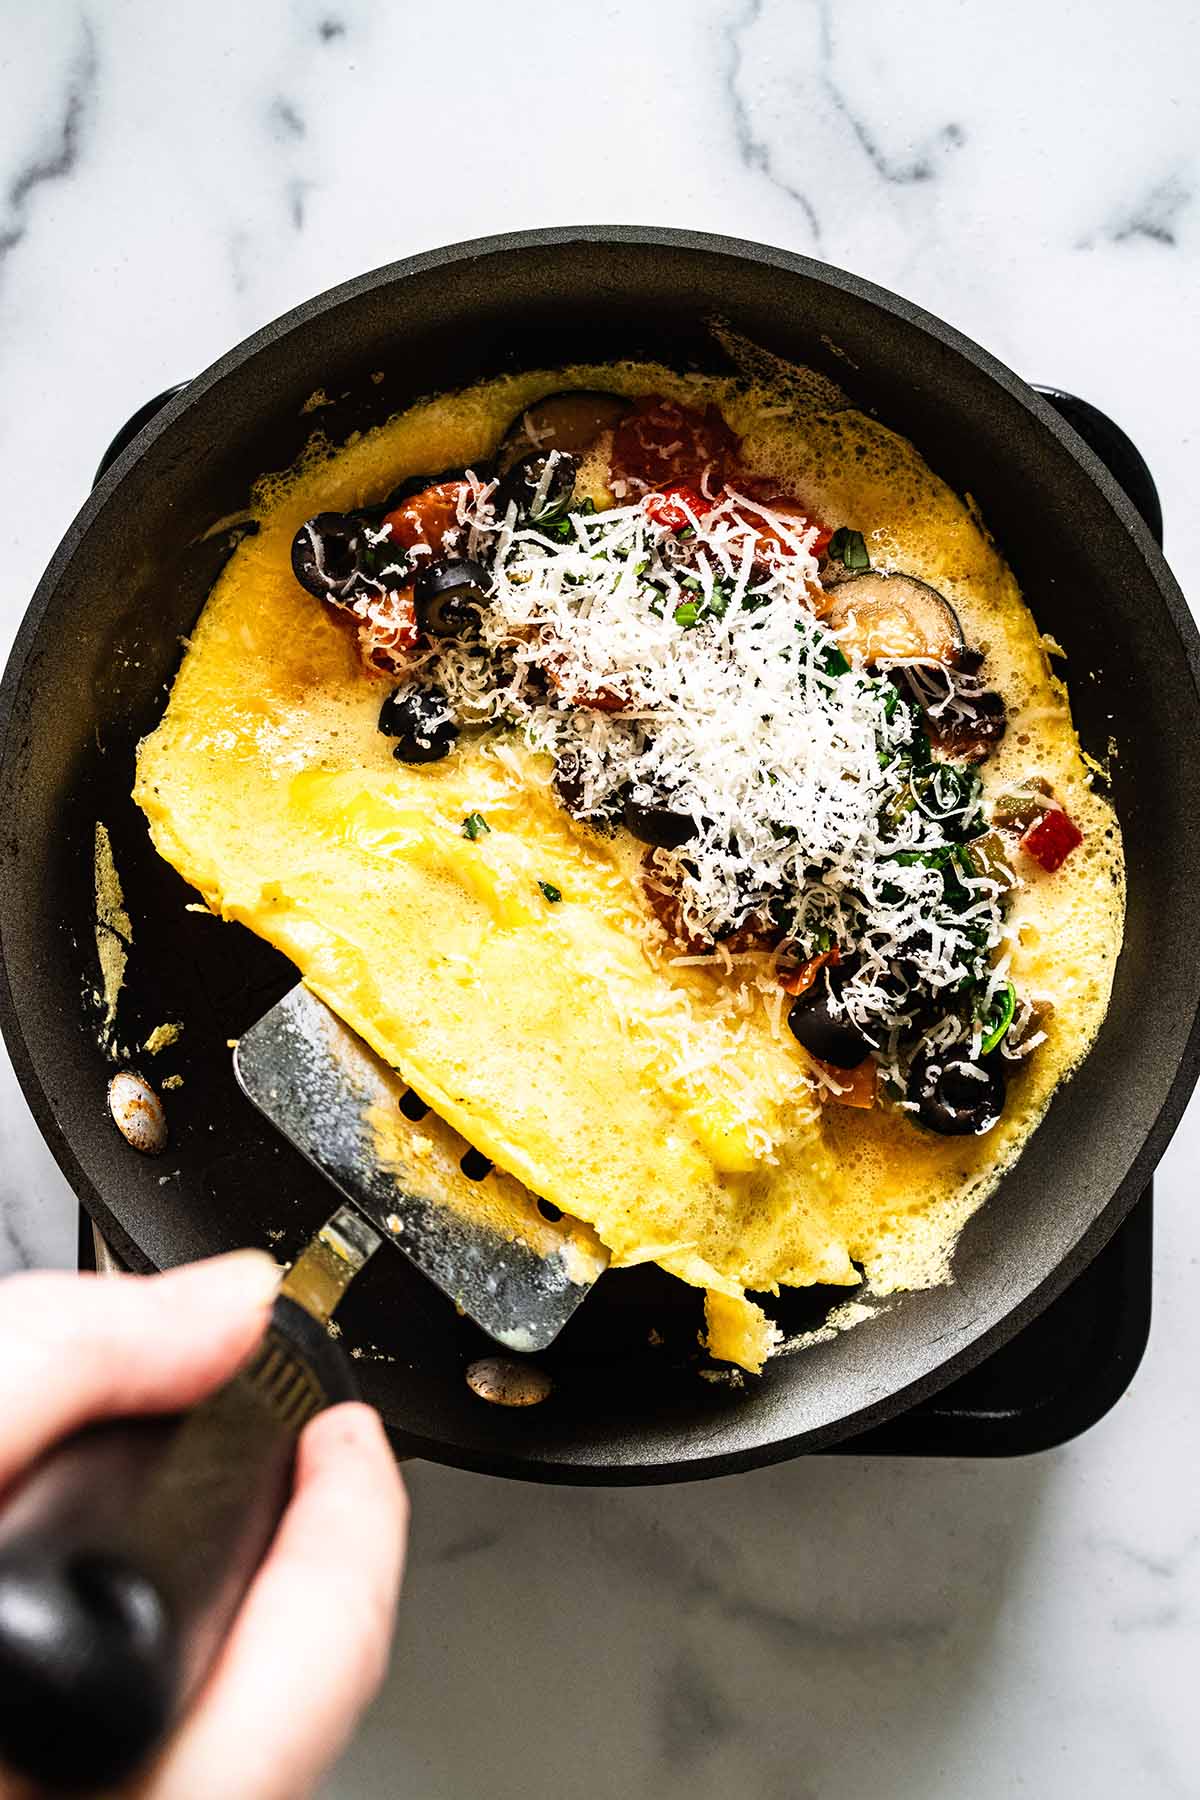 Spatula lifting unfilled half of omelette in a skillet